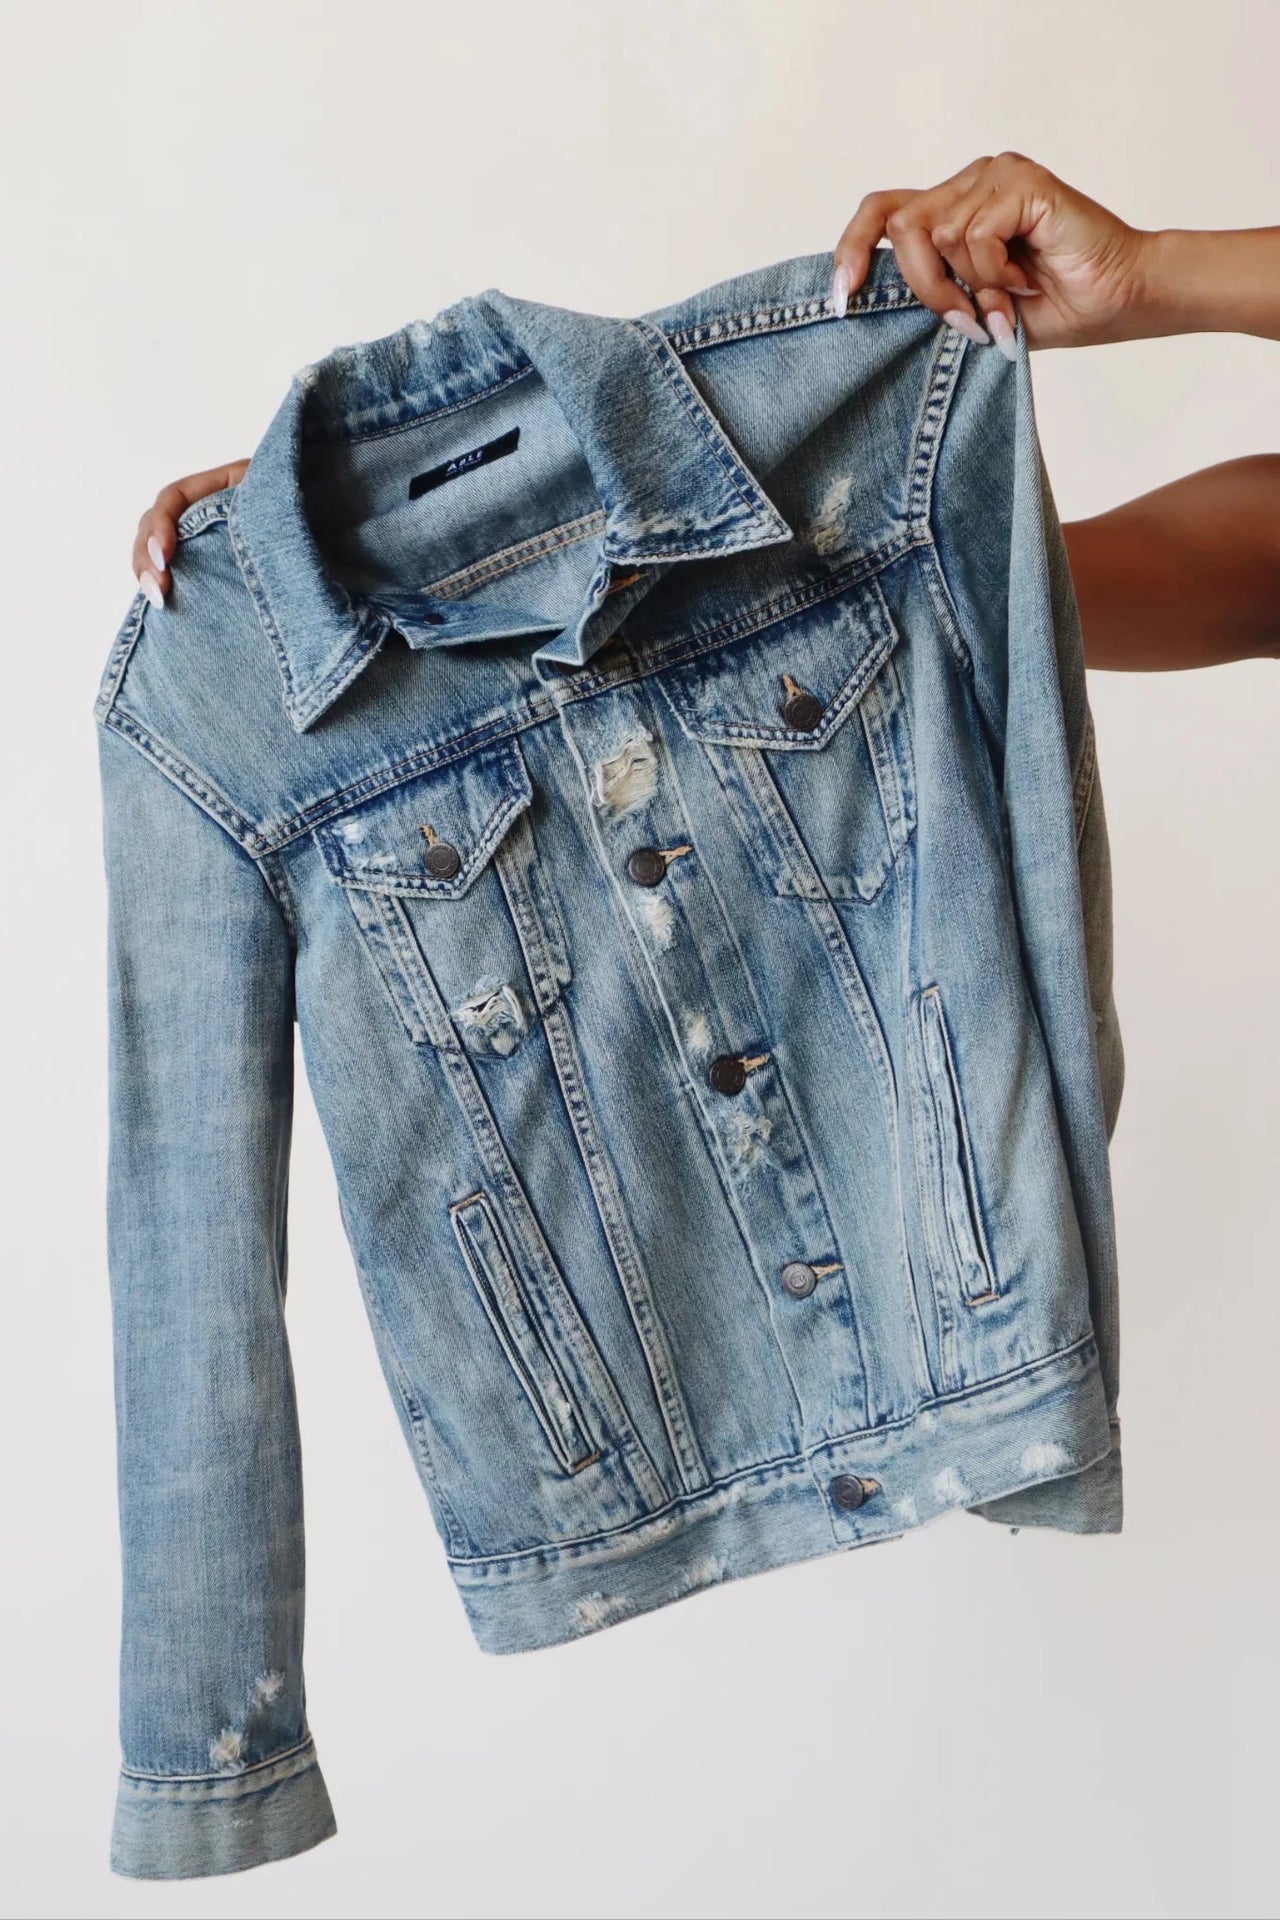 How to wear a denim jacket — The Essential Man